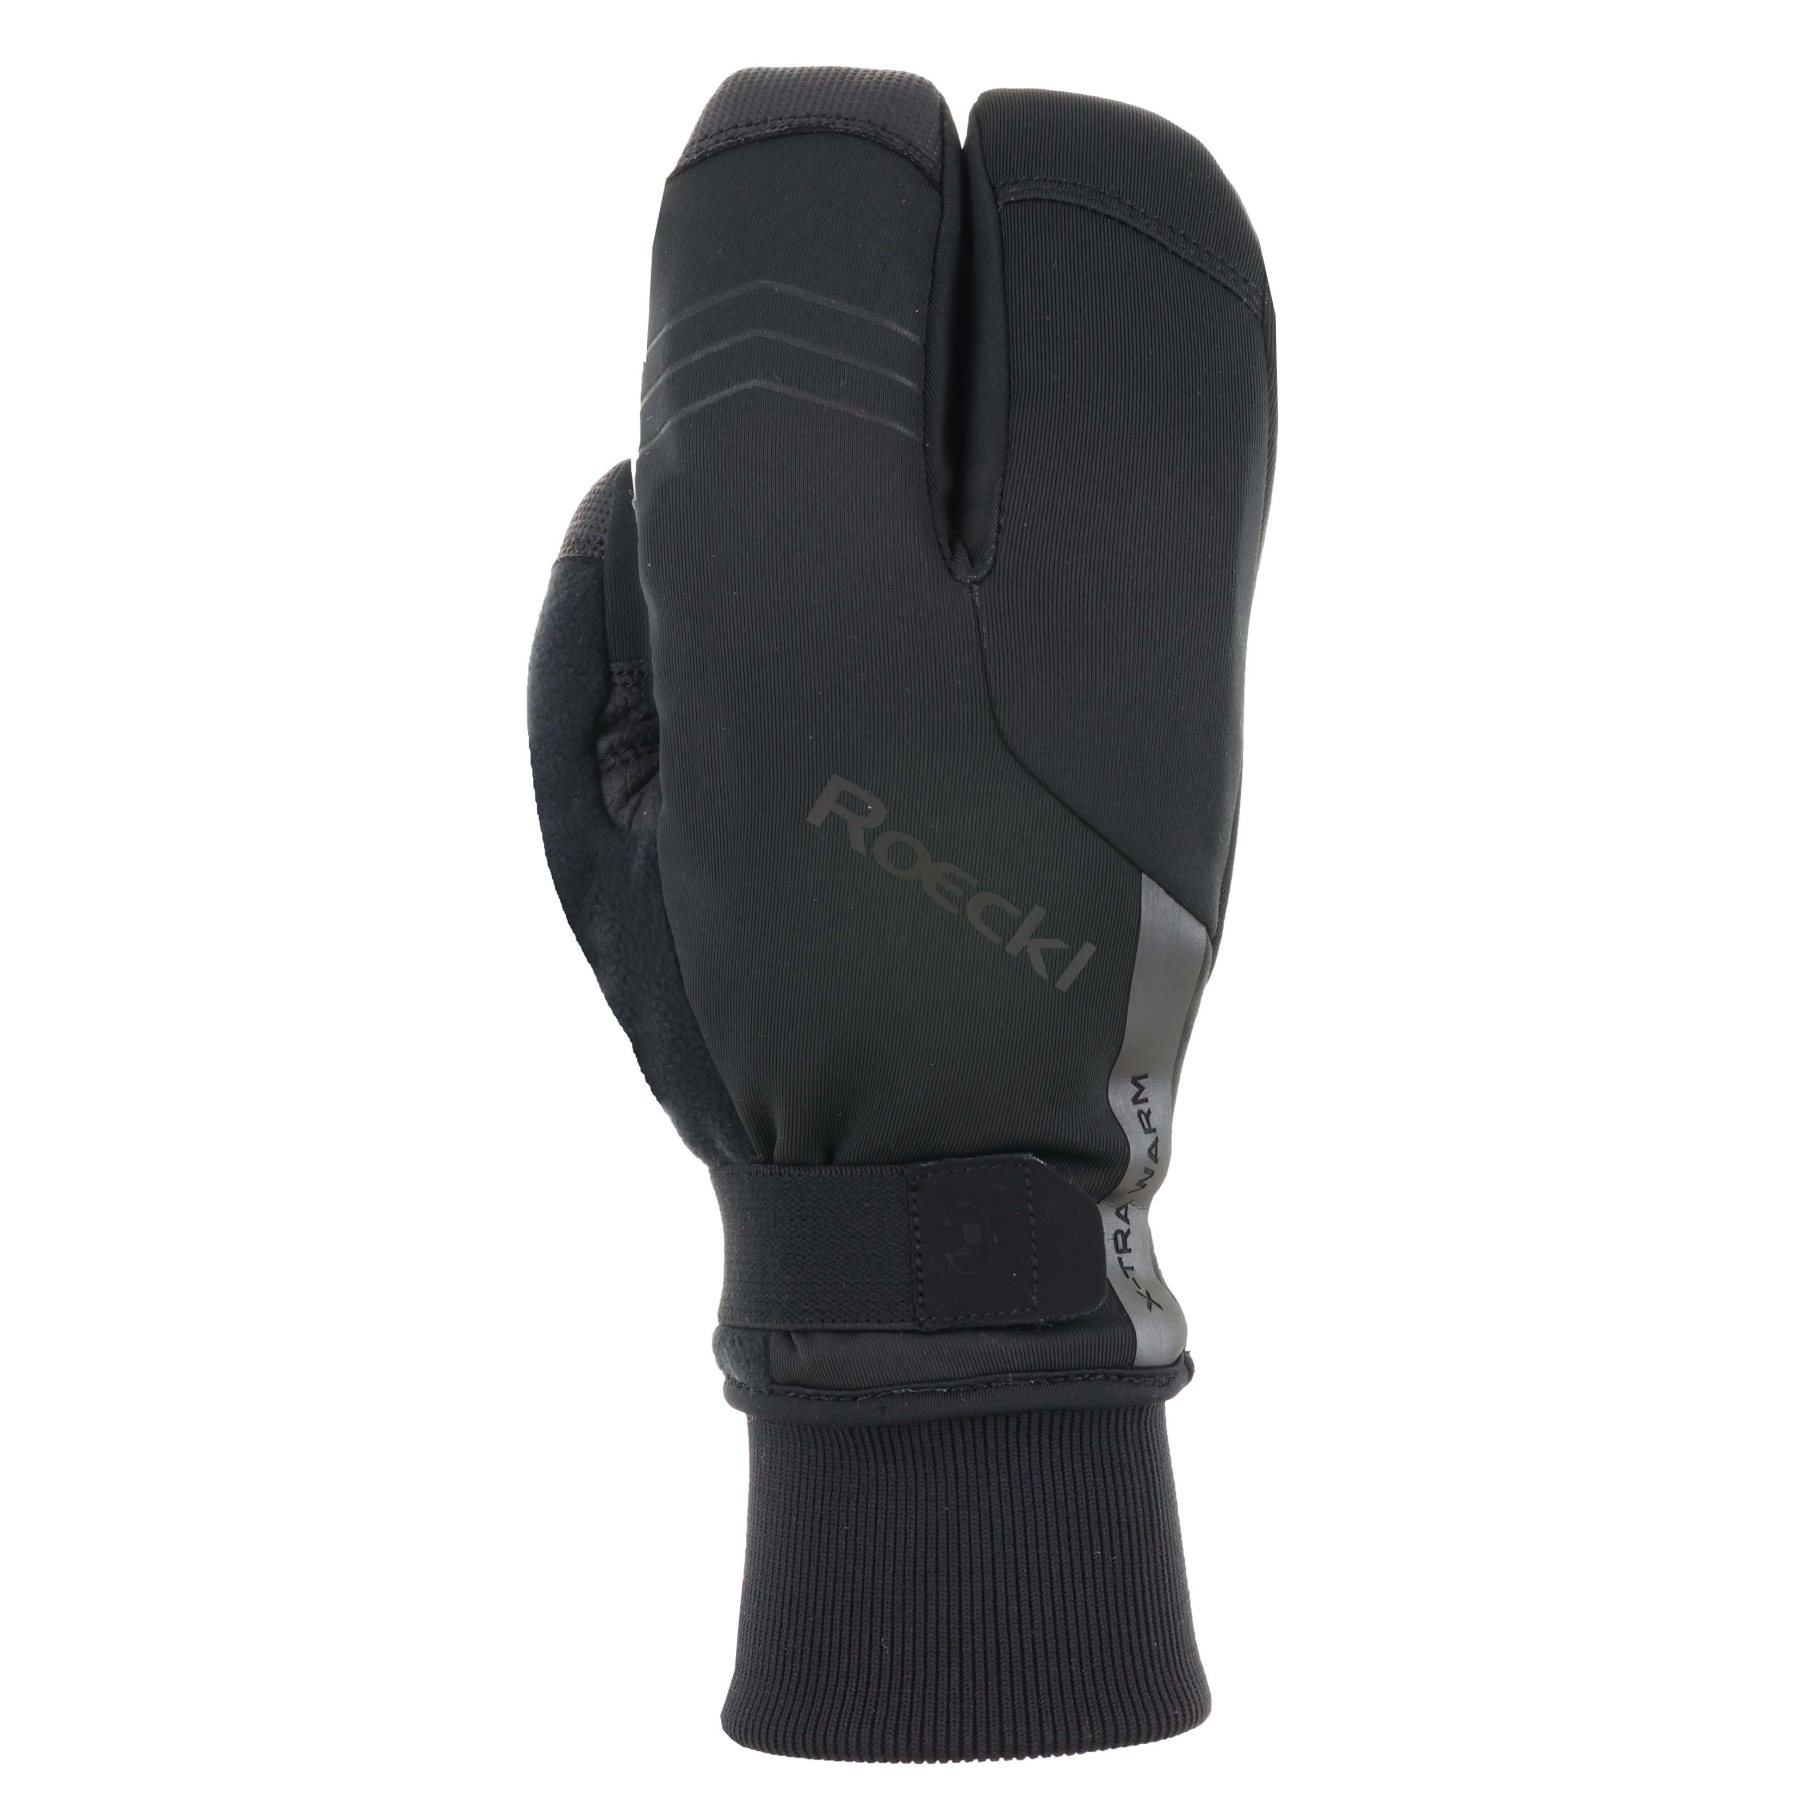 Picture of Roeckl Sports Villach 2 Lobster Cycling Gloves - black 9000